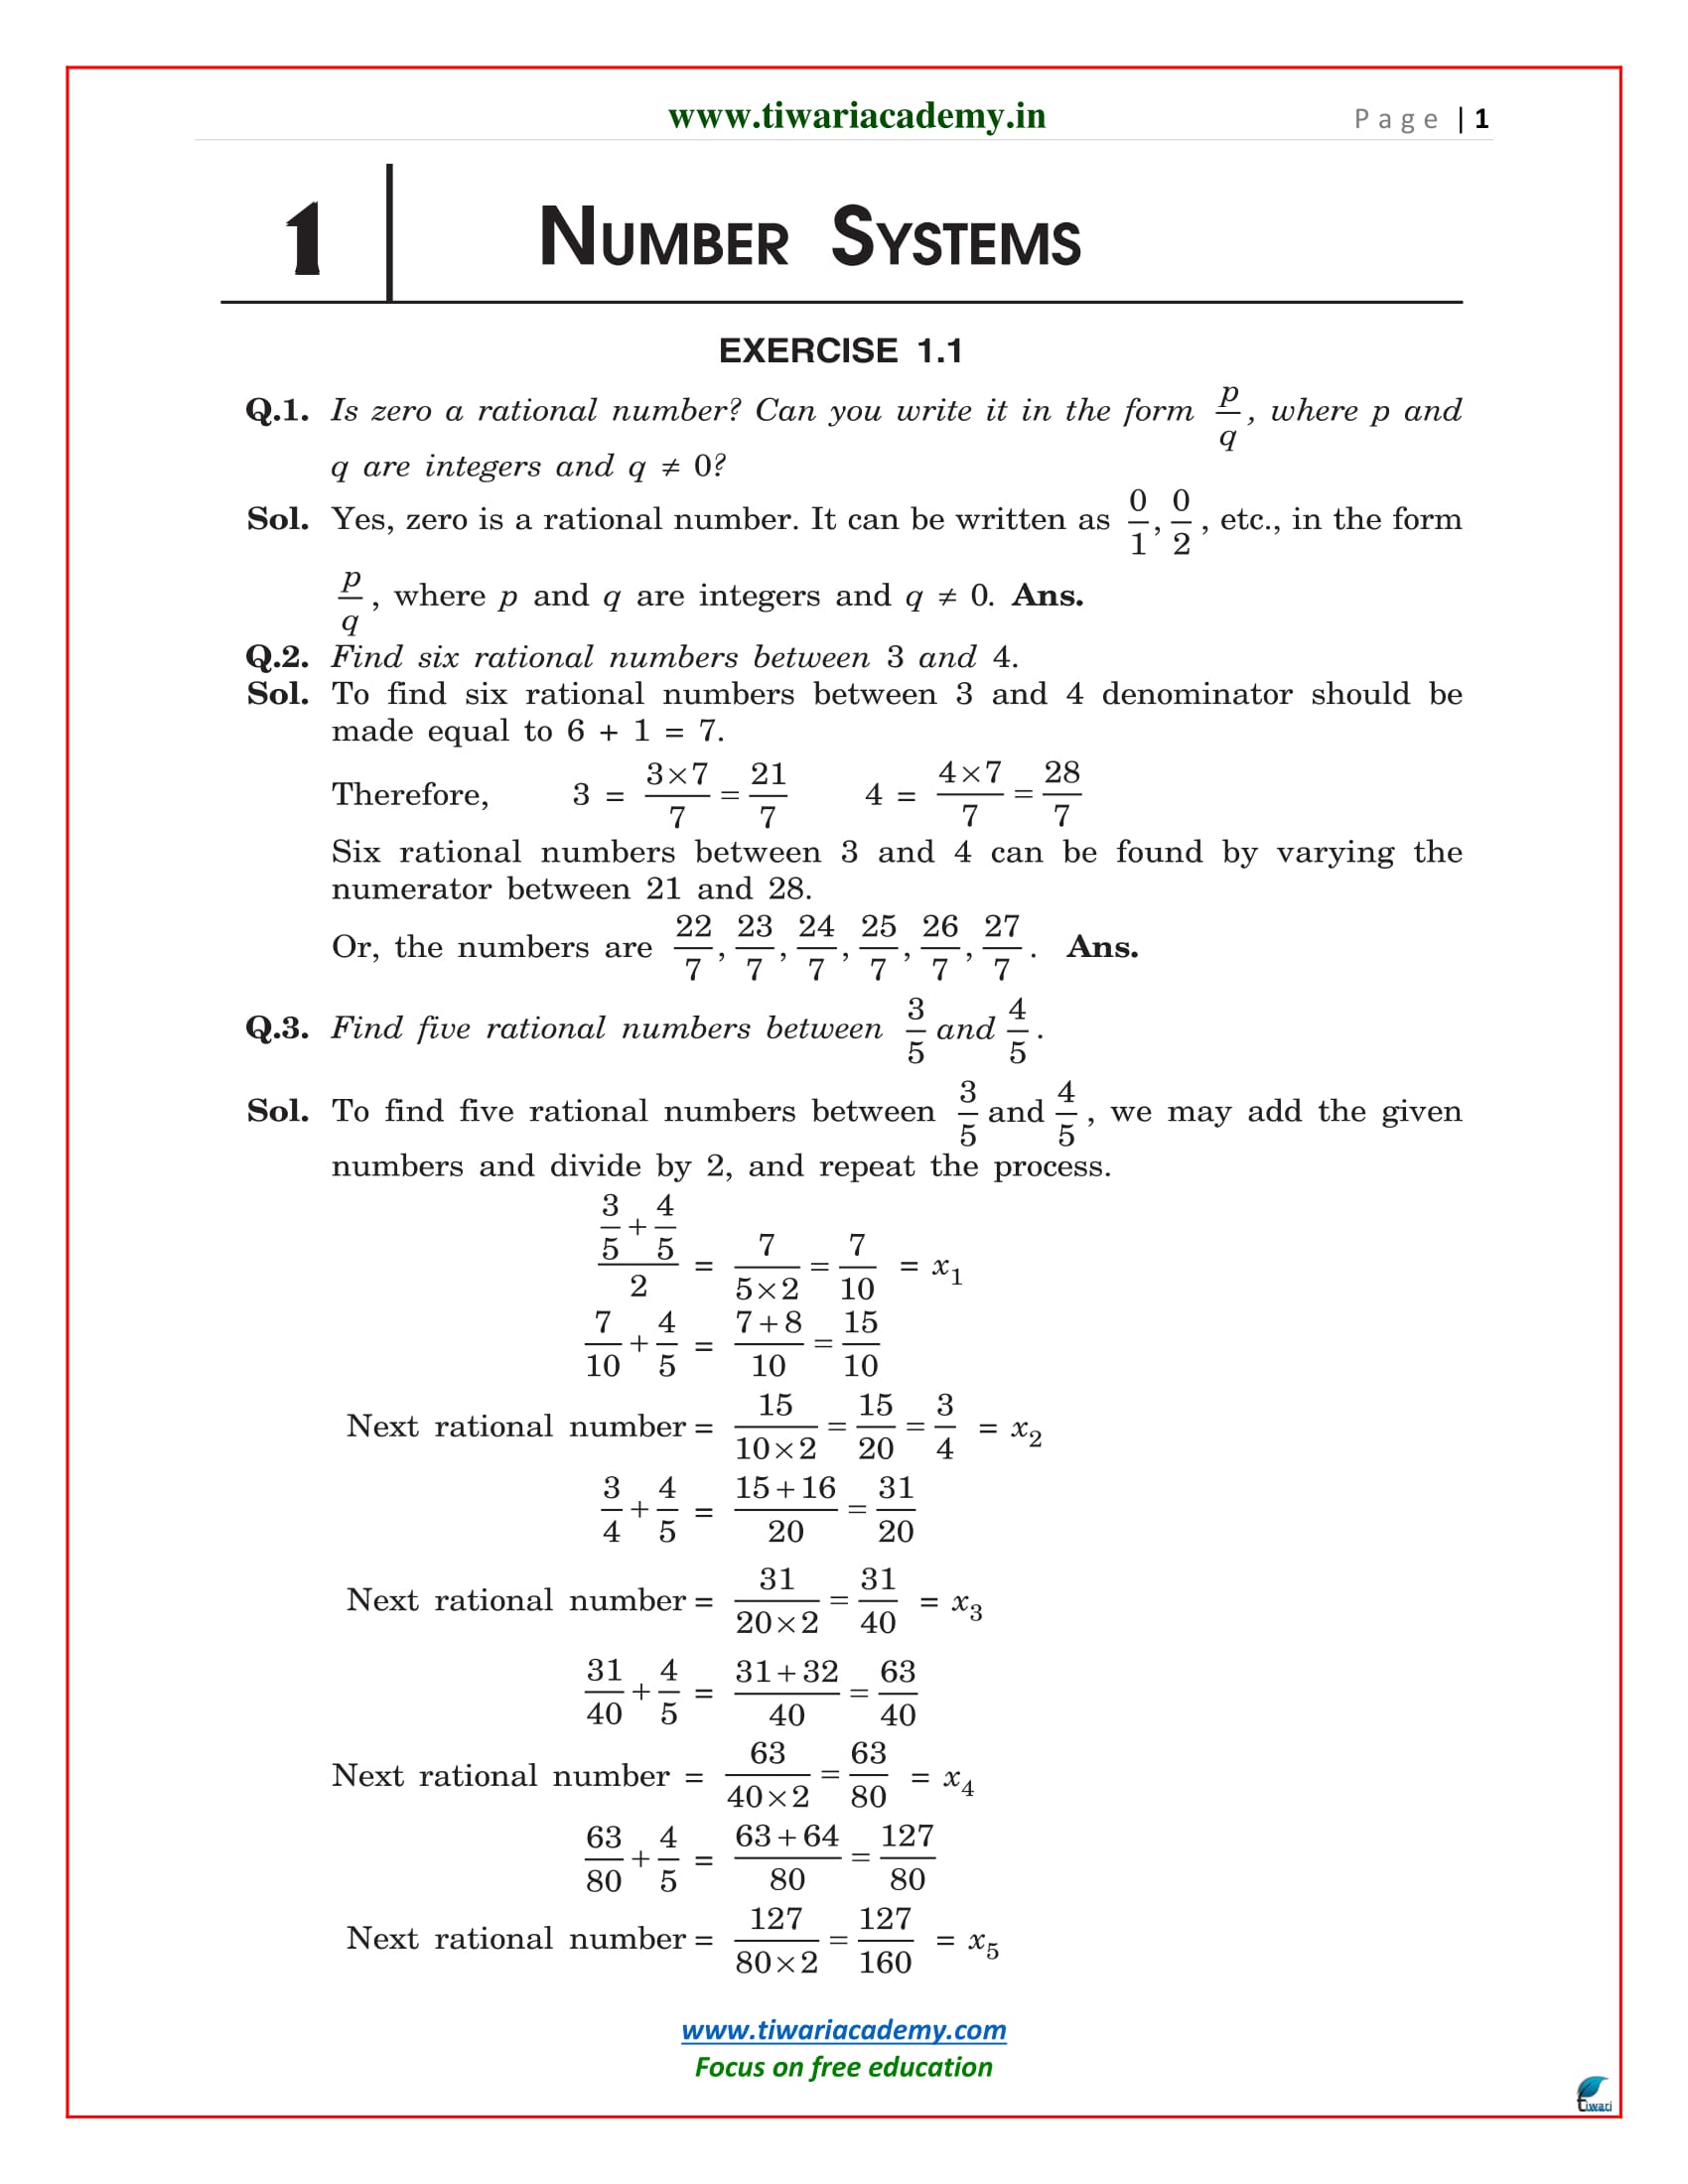 ncert-solutions-for-class-9-maths-chapter-1-number-systems-in-pdf